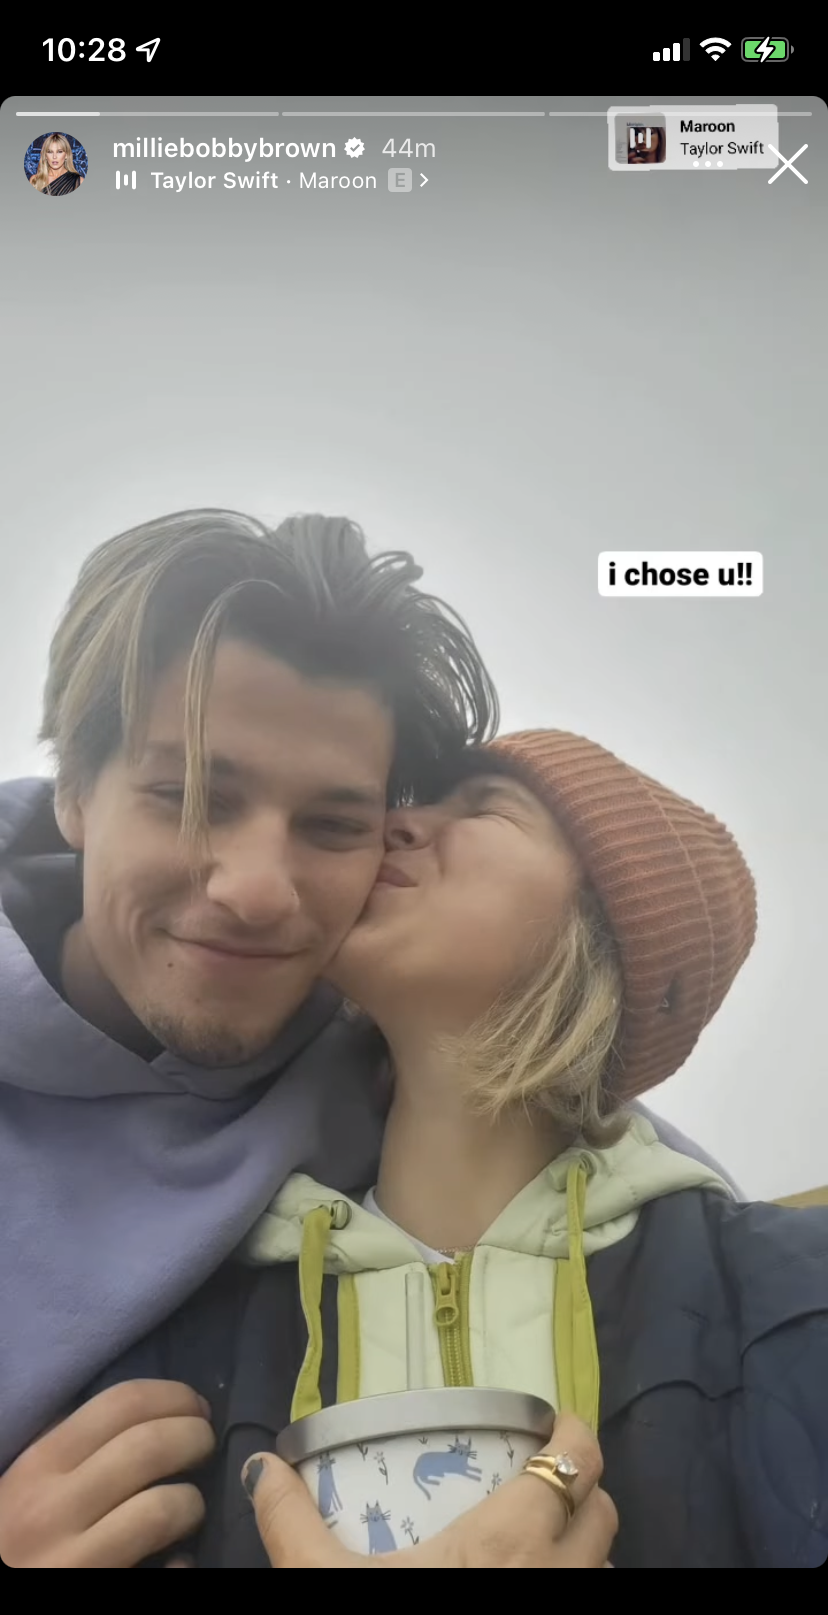 A Complete Timeline of Millie Bobby Brown and Jake Bongiovi's